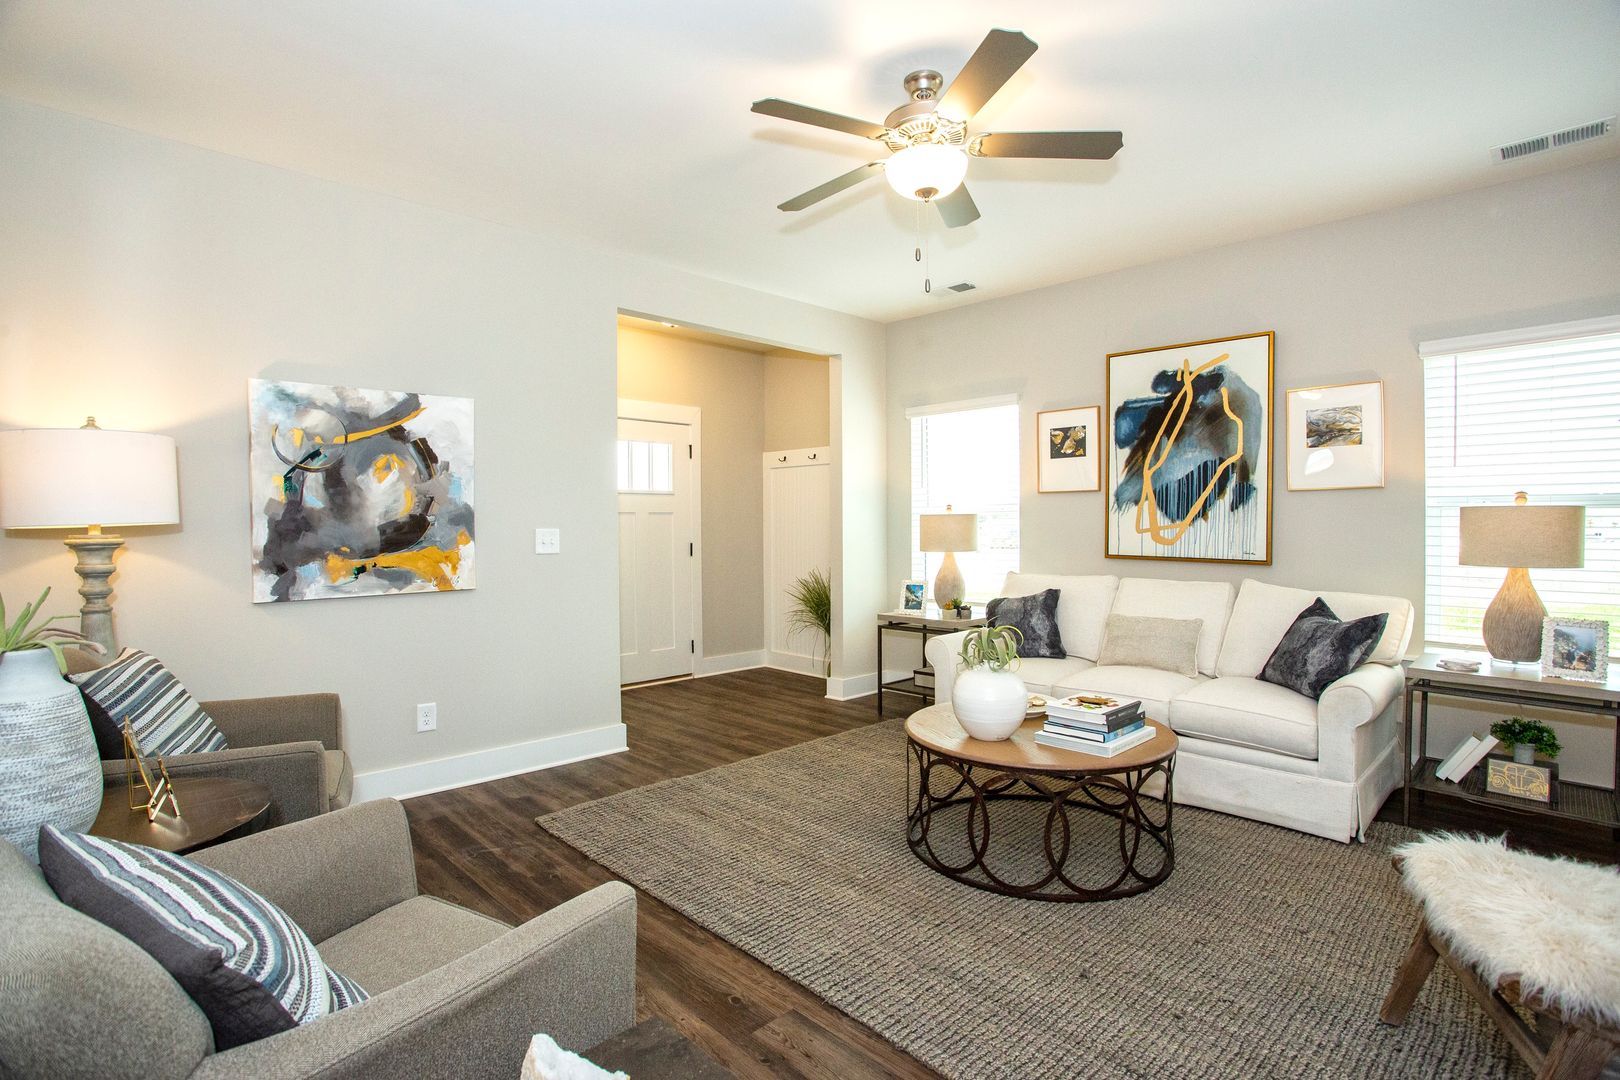 Pet Friendly floors inside a new homes for rent near birmingham in Leeds at the Cottages on Weaver Avenue